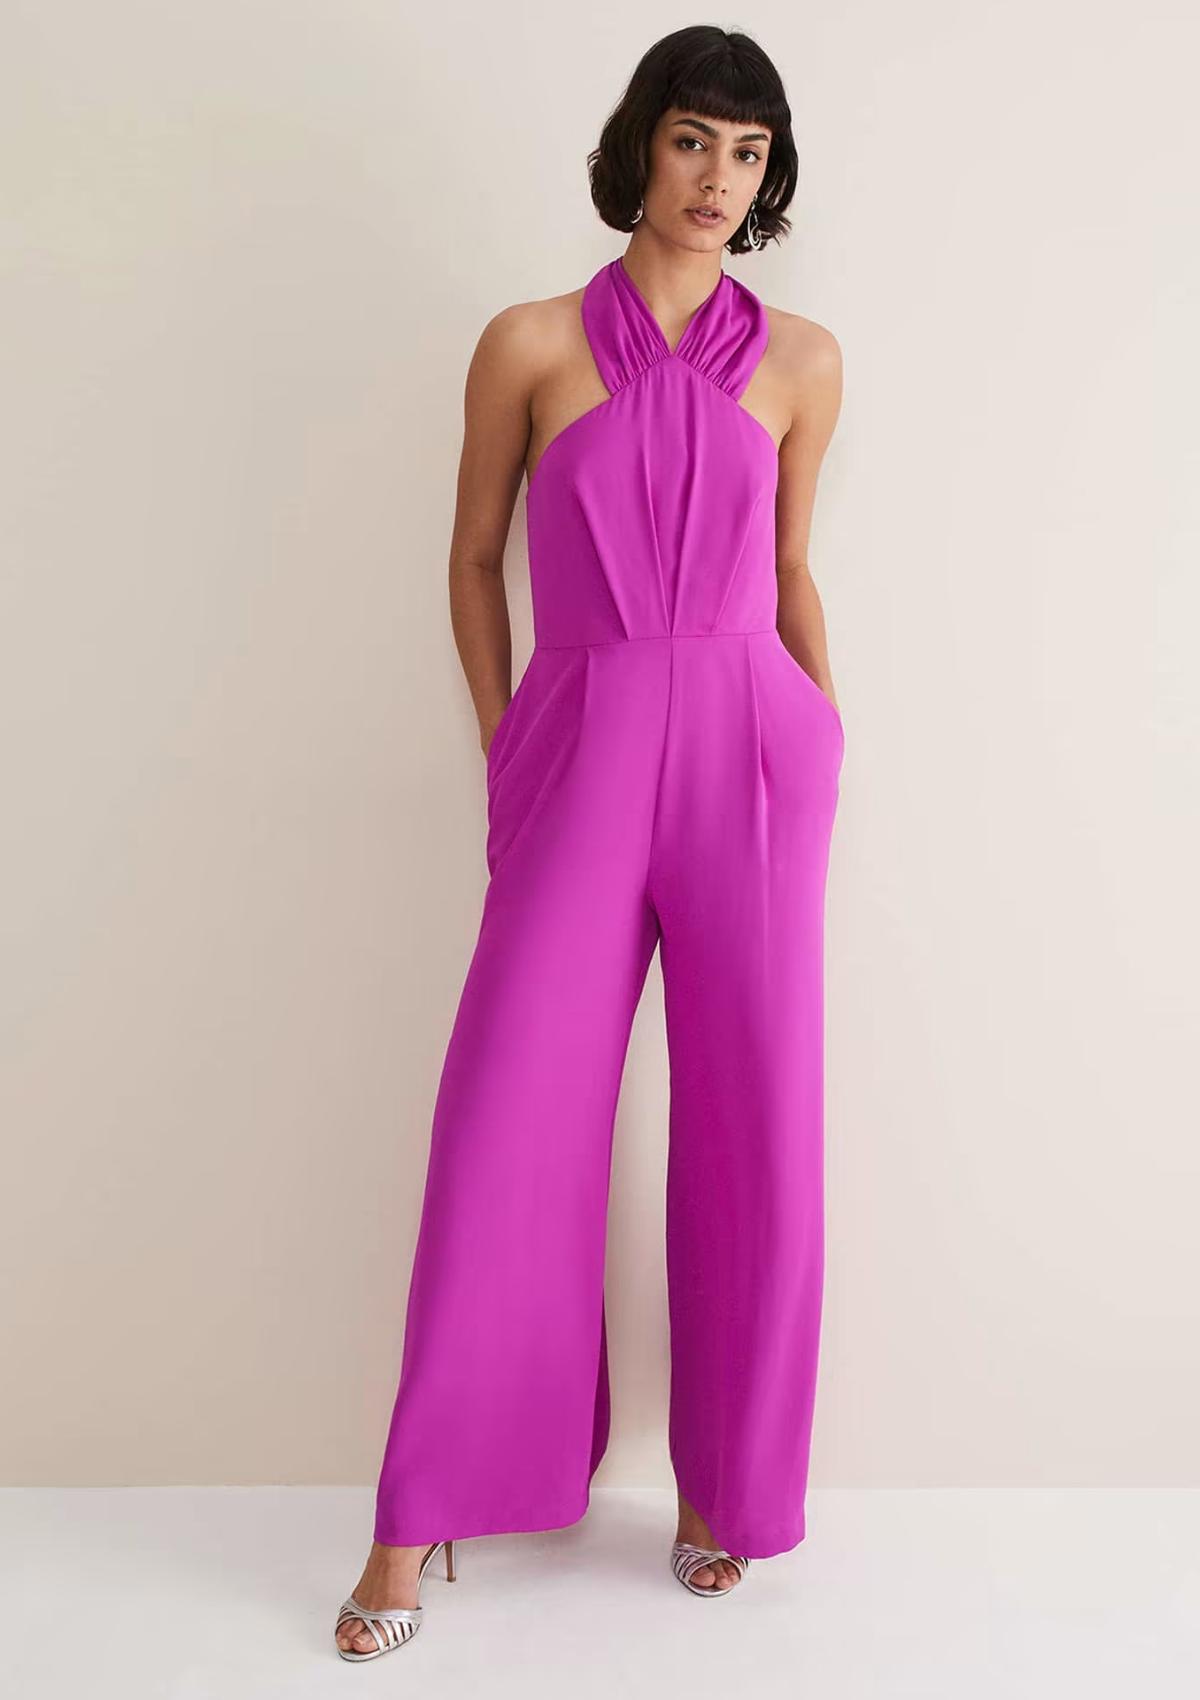 How to Create Two Jumpsuit Outfit Ideas That Are Affordable - Posh